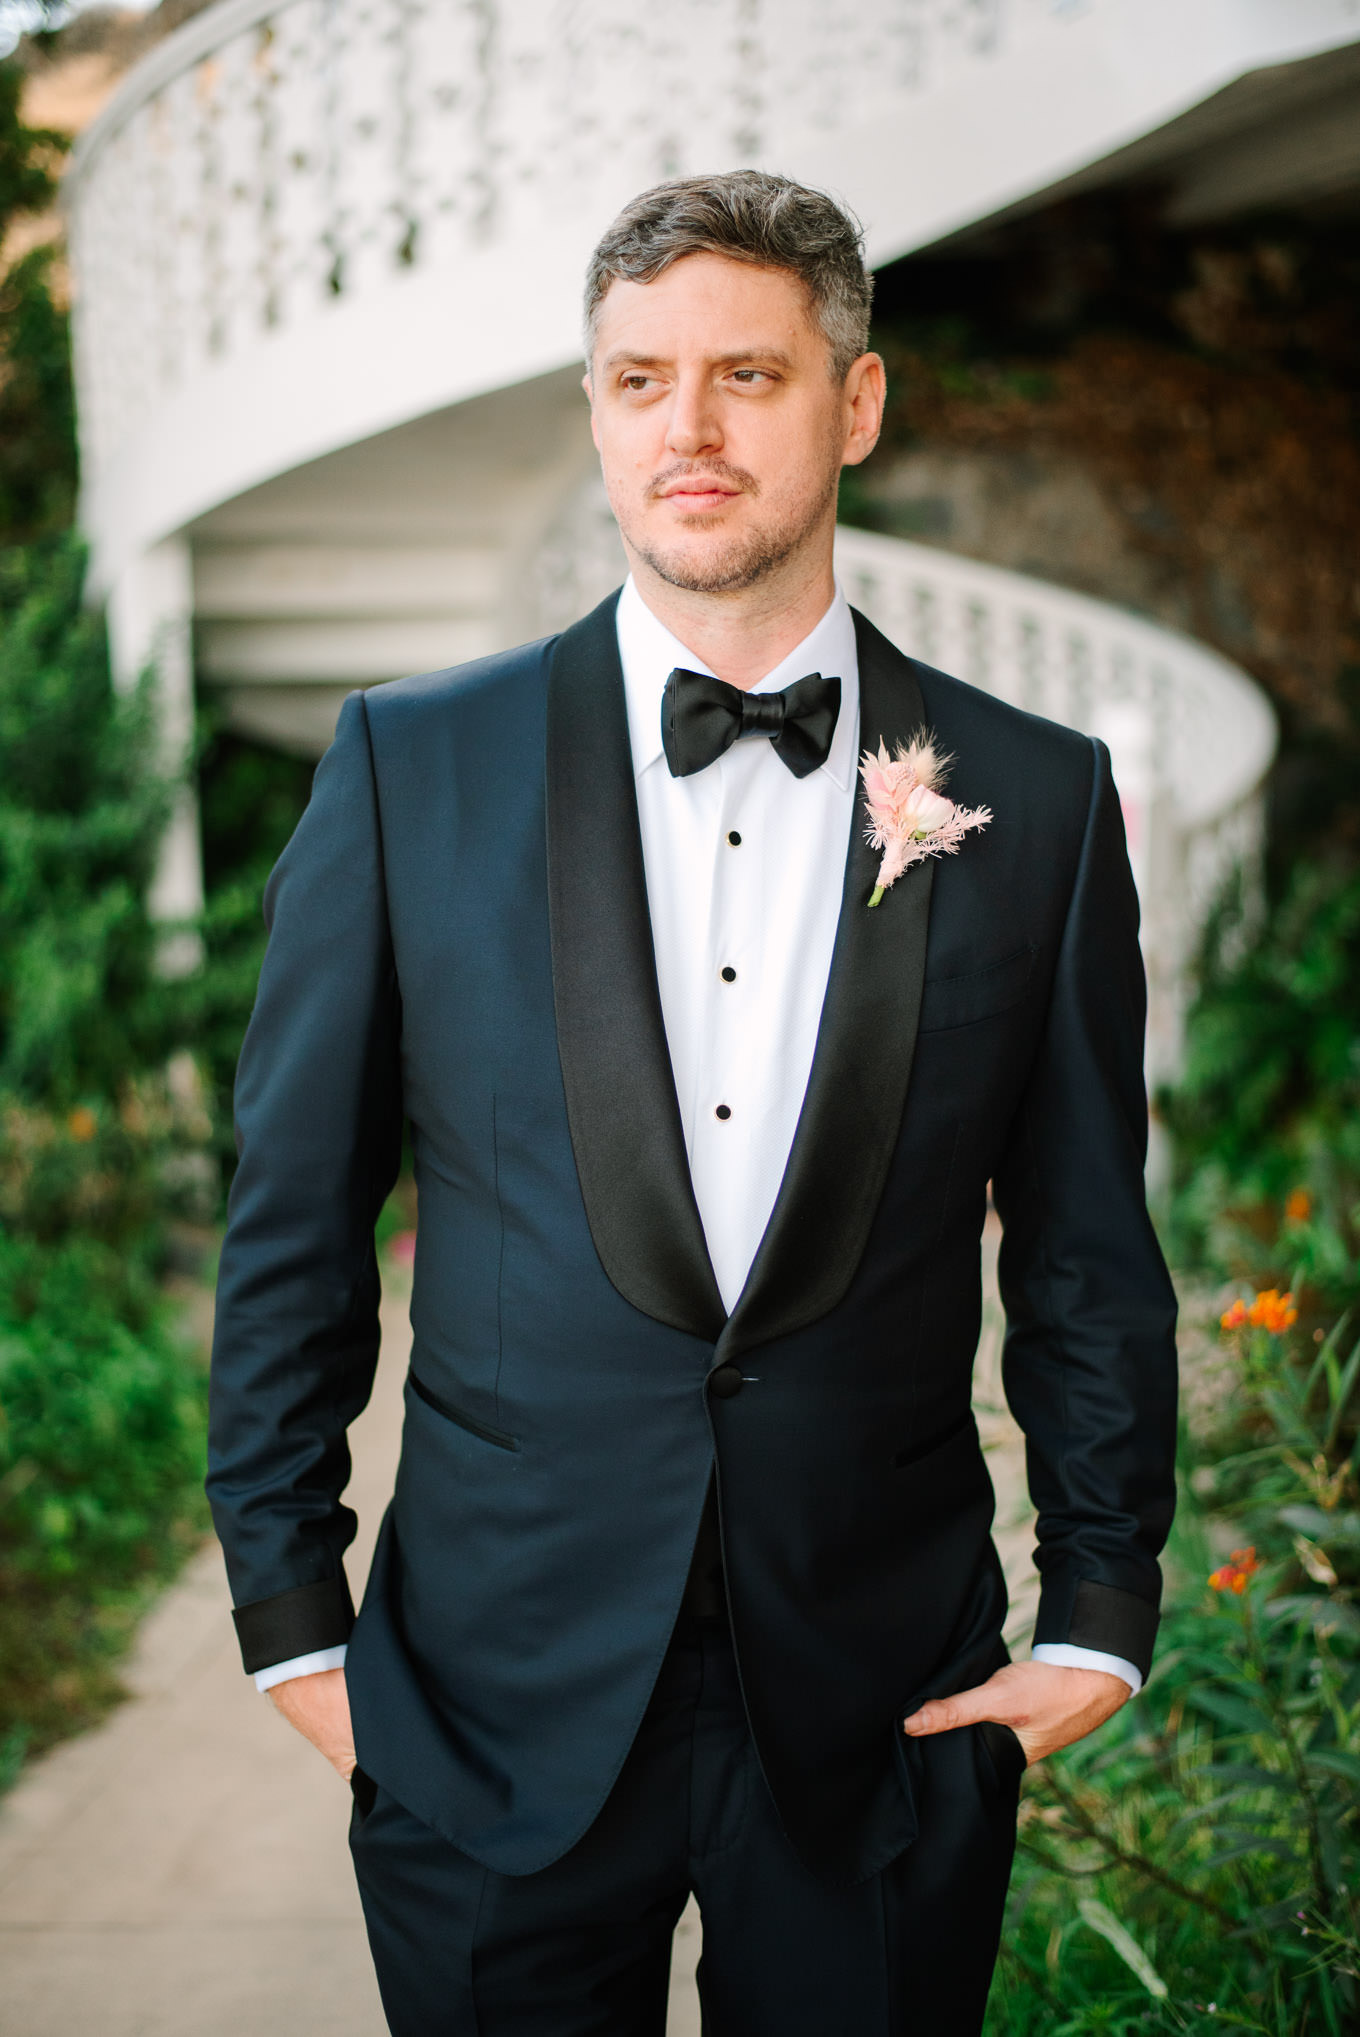 Groom in Tom Ford tuxedo | Colorful and quirky wedding at Higuera Ranch in San Luis Obispo | #sanluisobispowedding #californiawedding #higueraranch #madonnainn   Source: Mary Costa Photography | Los Angeles